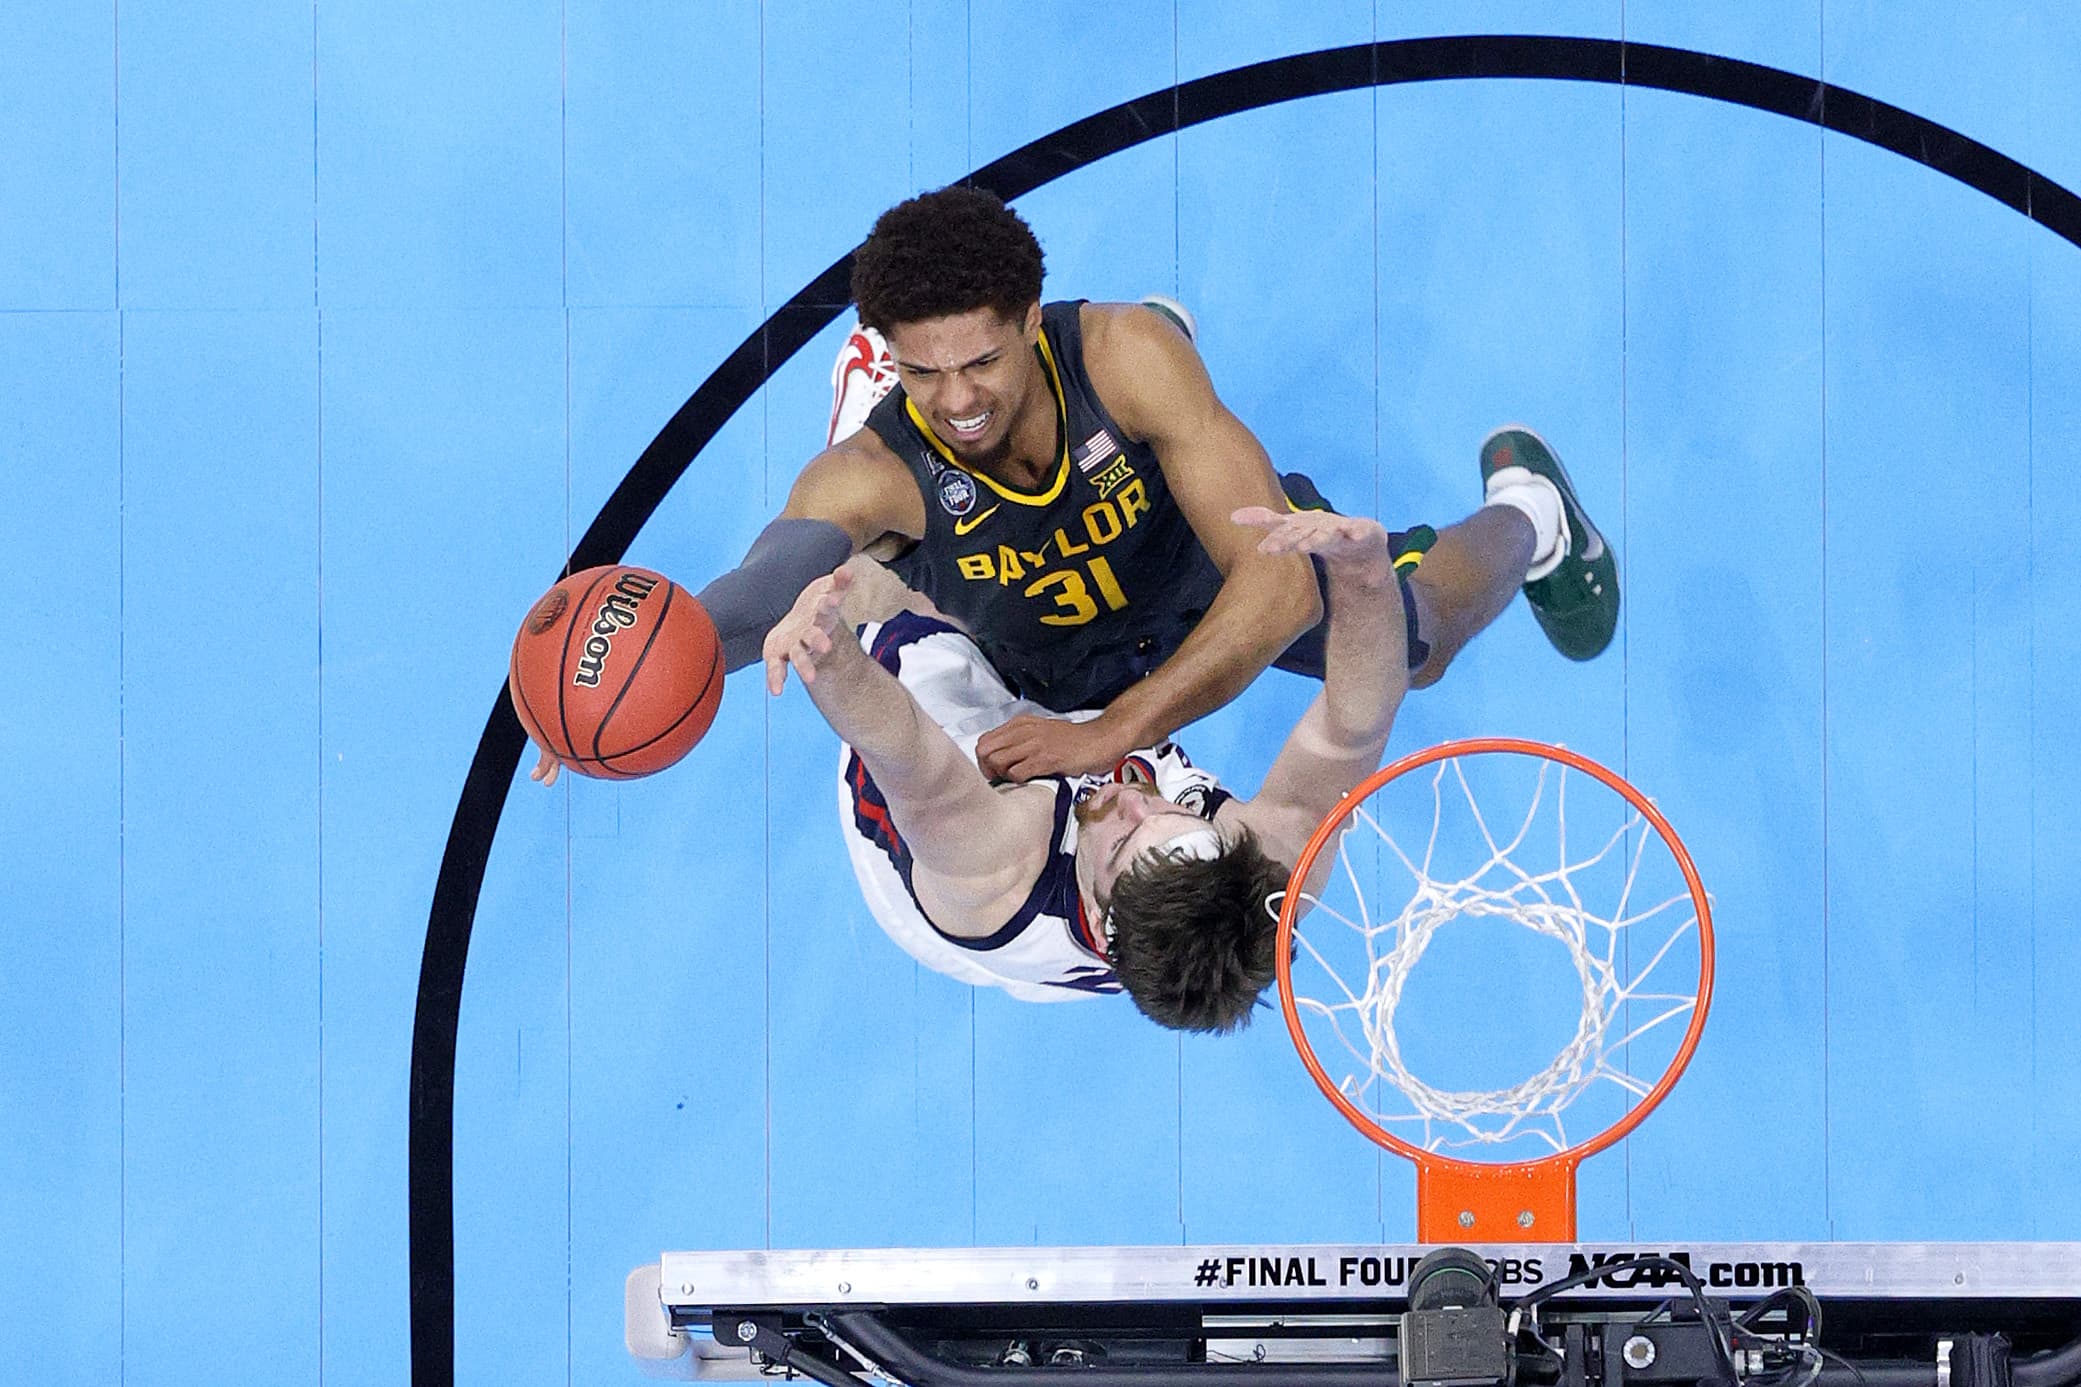 CBS saw 14% decline in viewers for NCAA men's basketball championship game, while ratings for women's title match on ESPN grew - CNBC